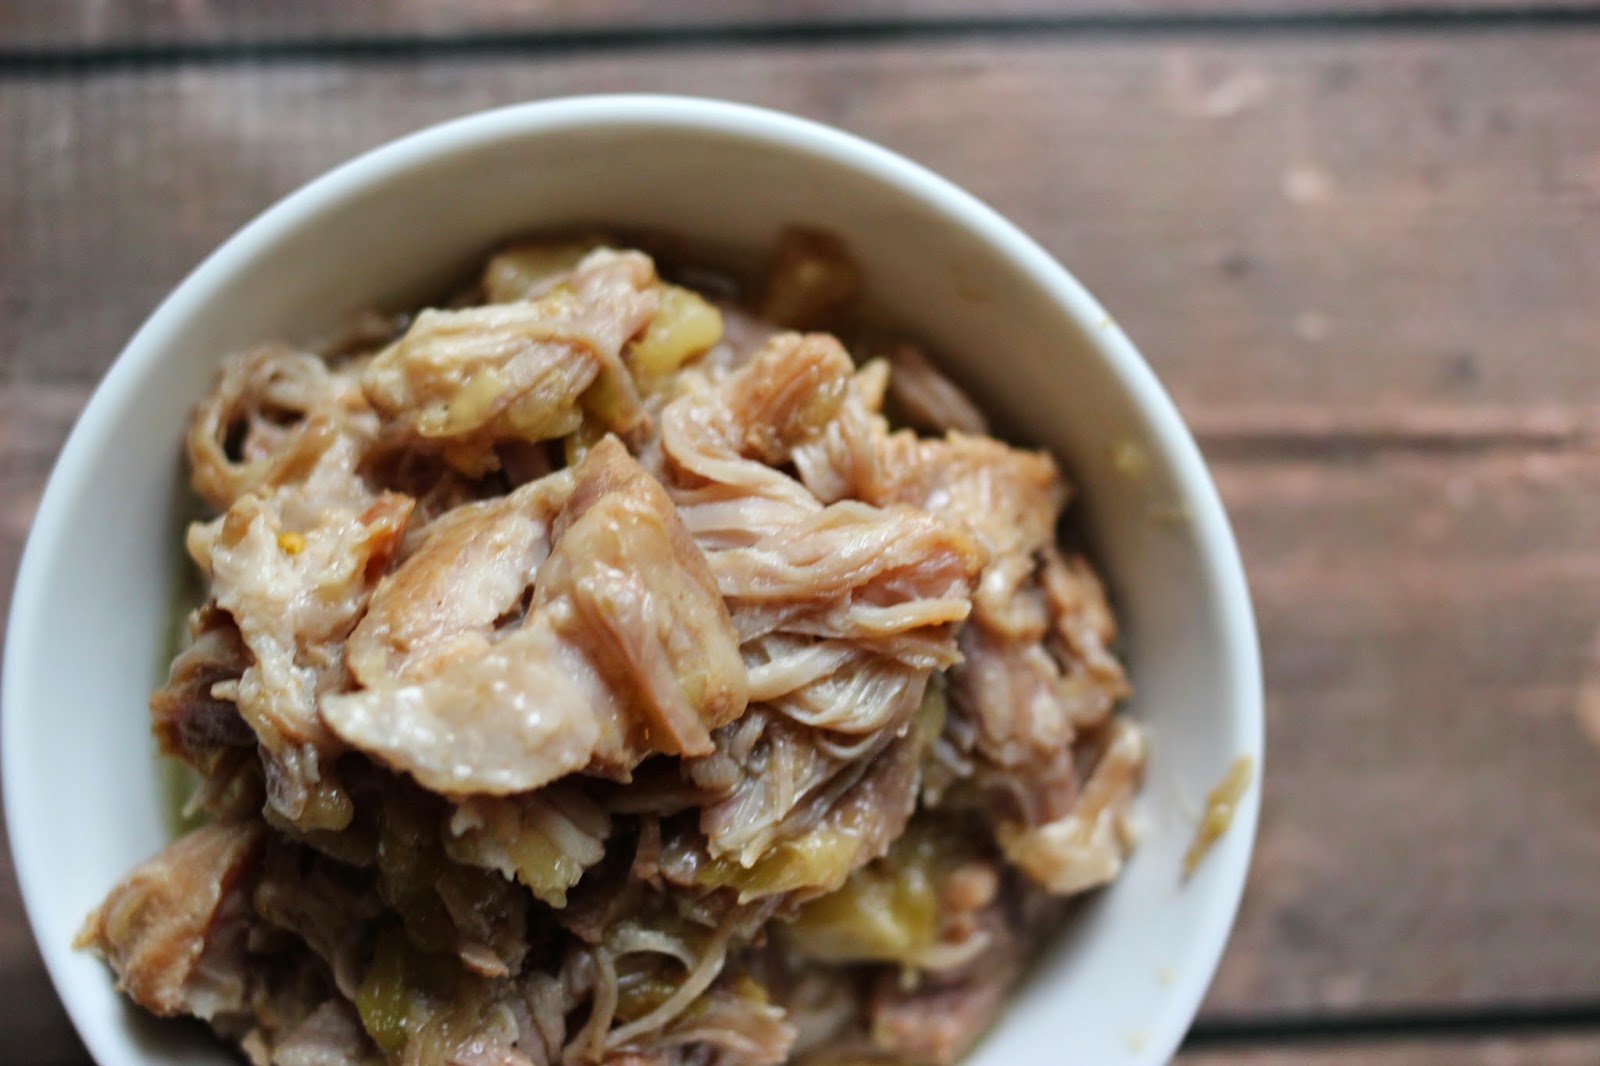 Slow Cooker Pineapple Green Chile Pulled Pork 